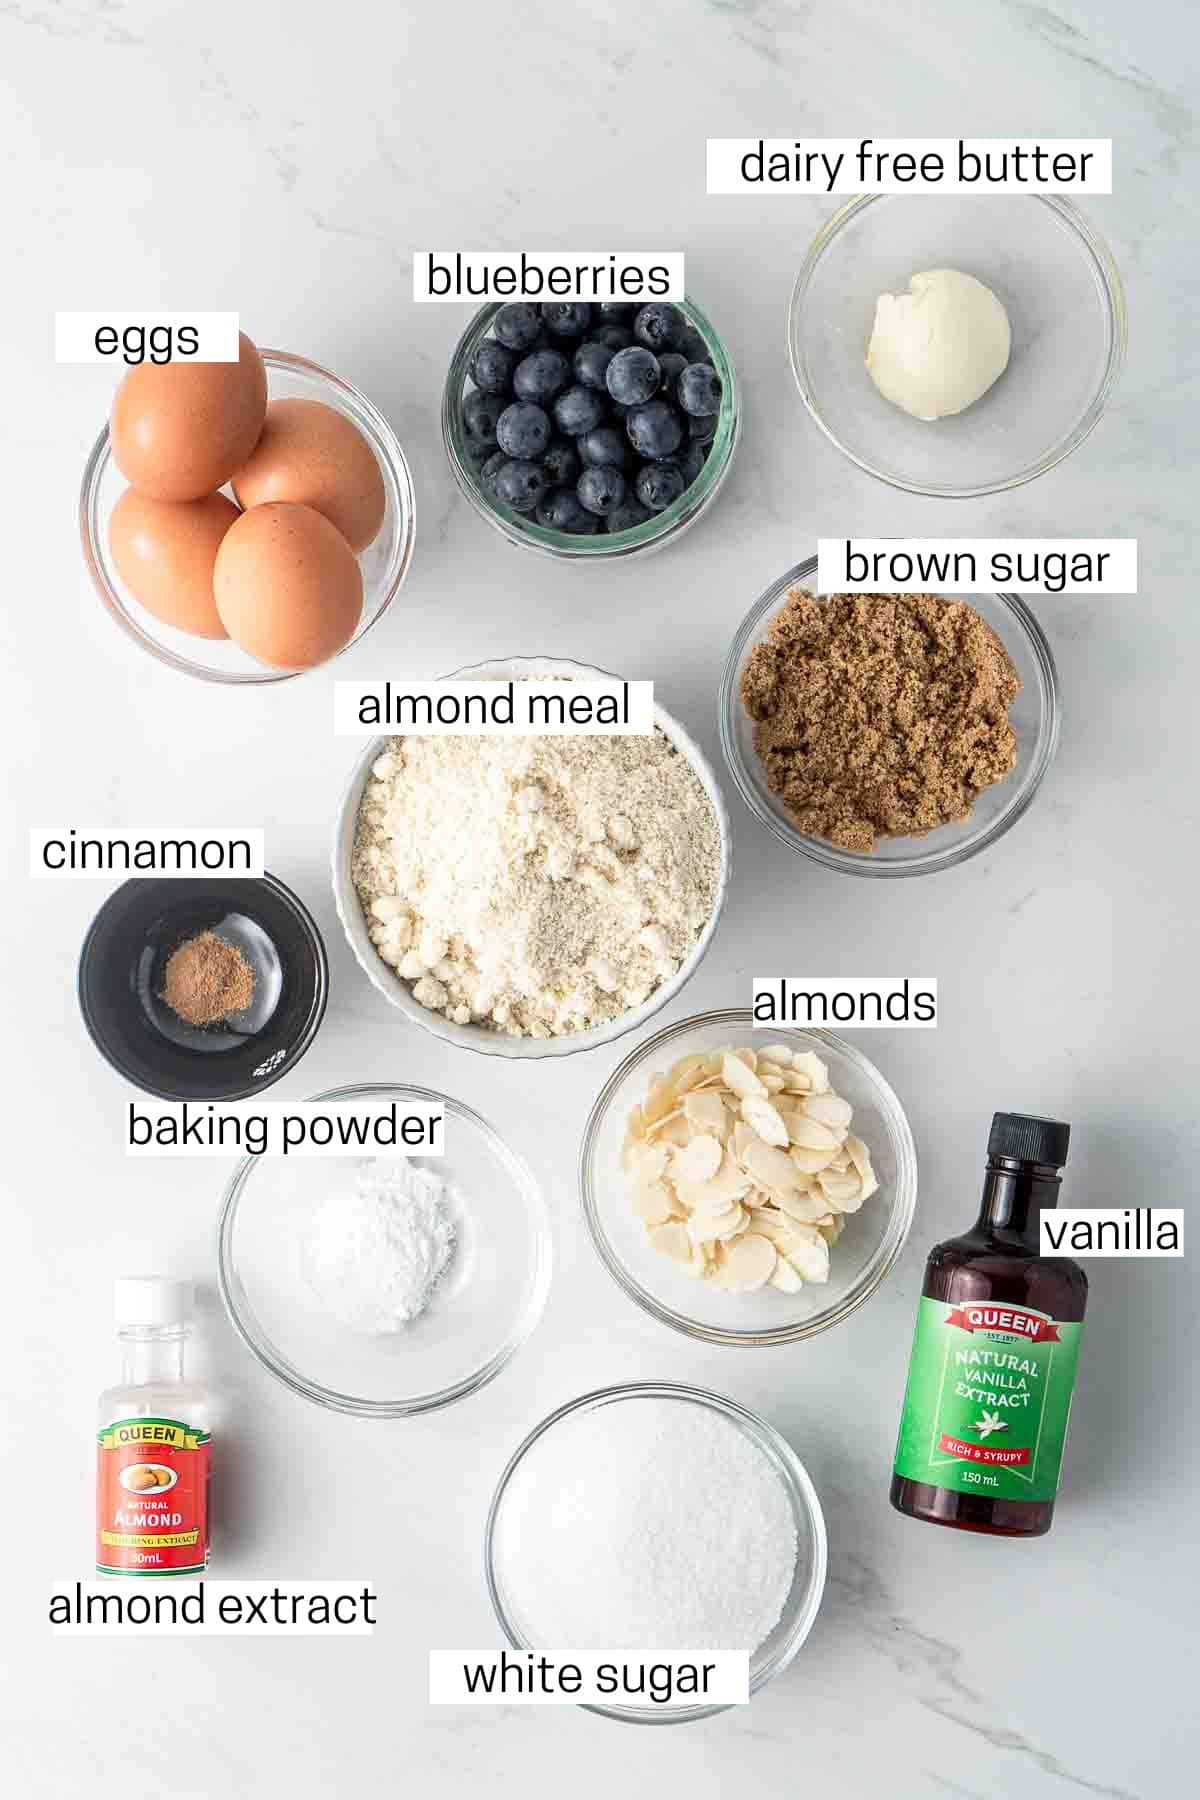 All ingredients needed for blueberry almond cake laid out in small bowls.